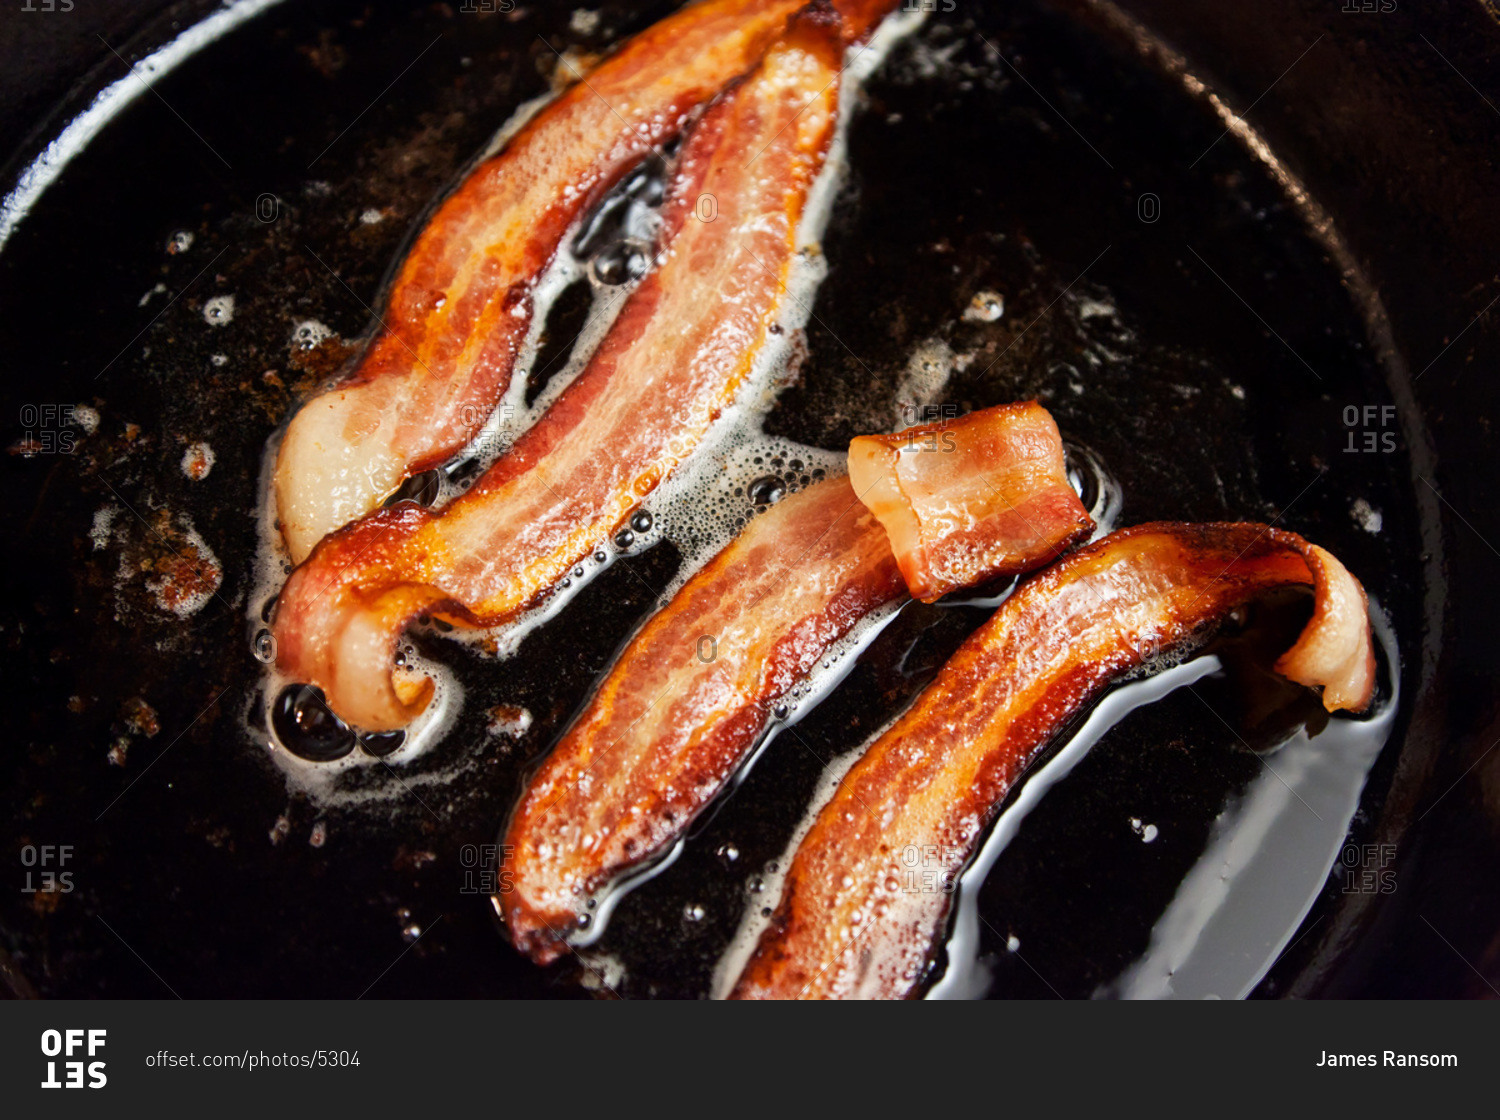 Four pieces of bacon frying in a cast iron skillet